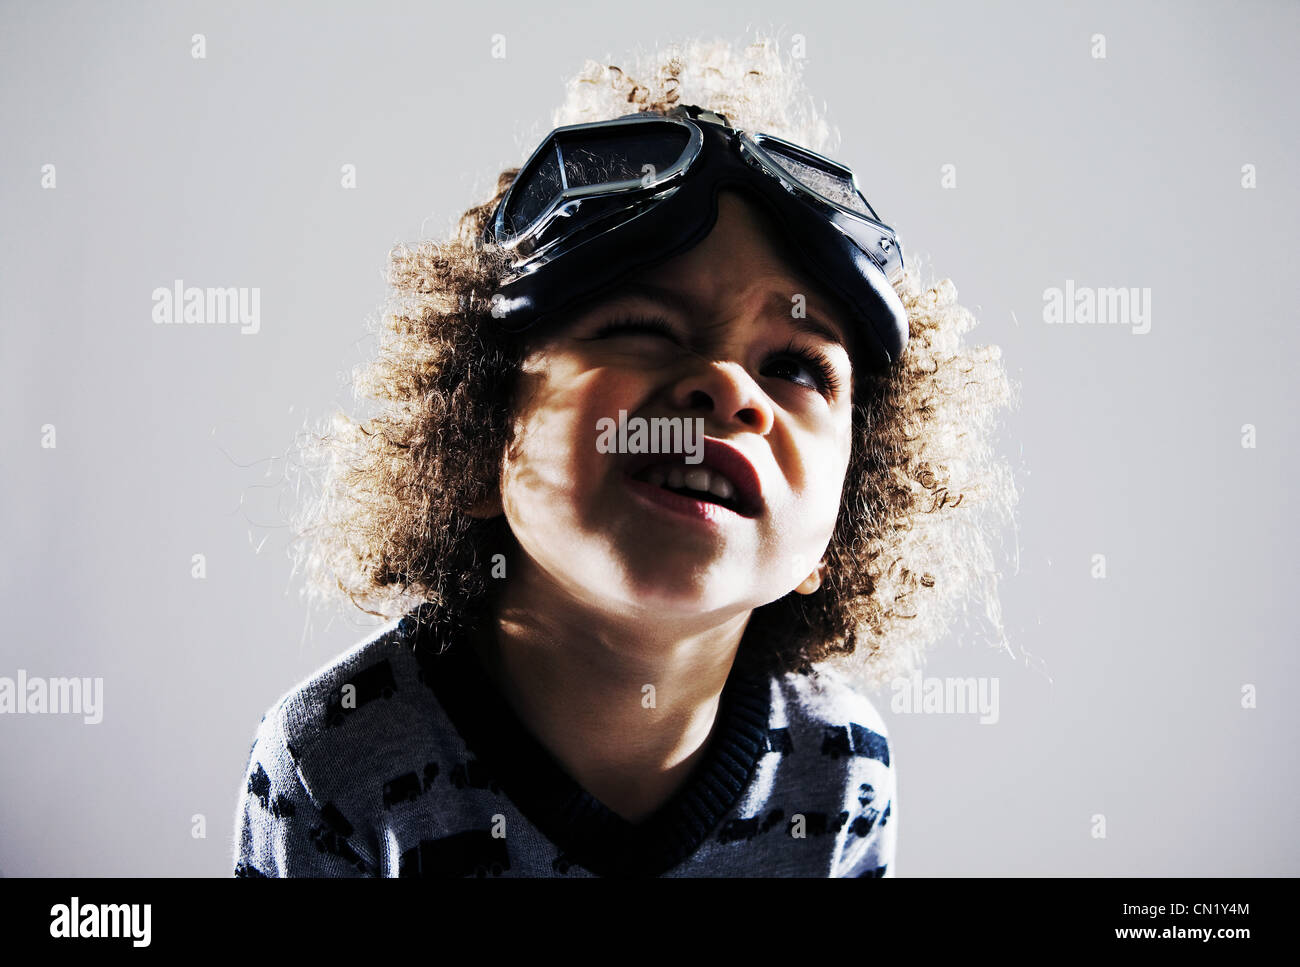 Young boy with flying goggles on head Stock Photo